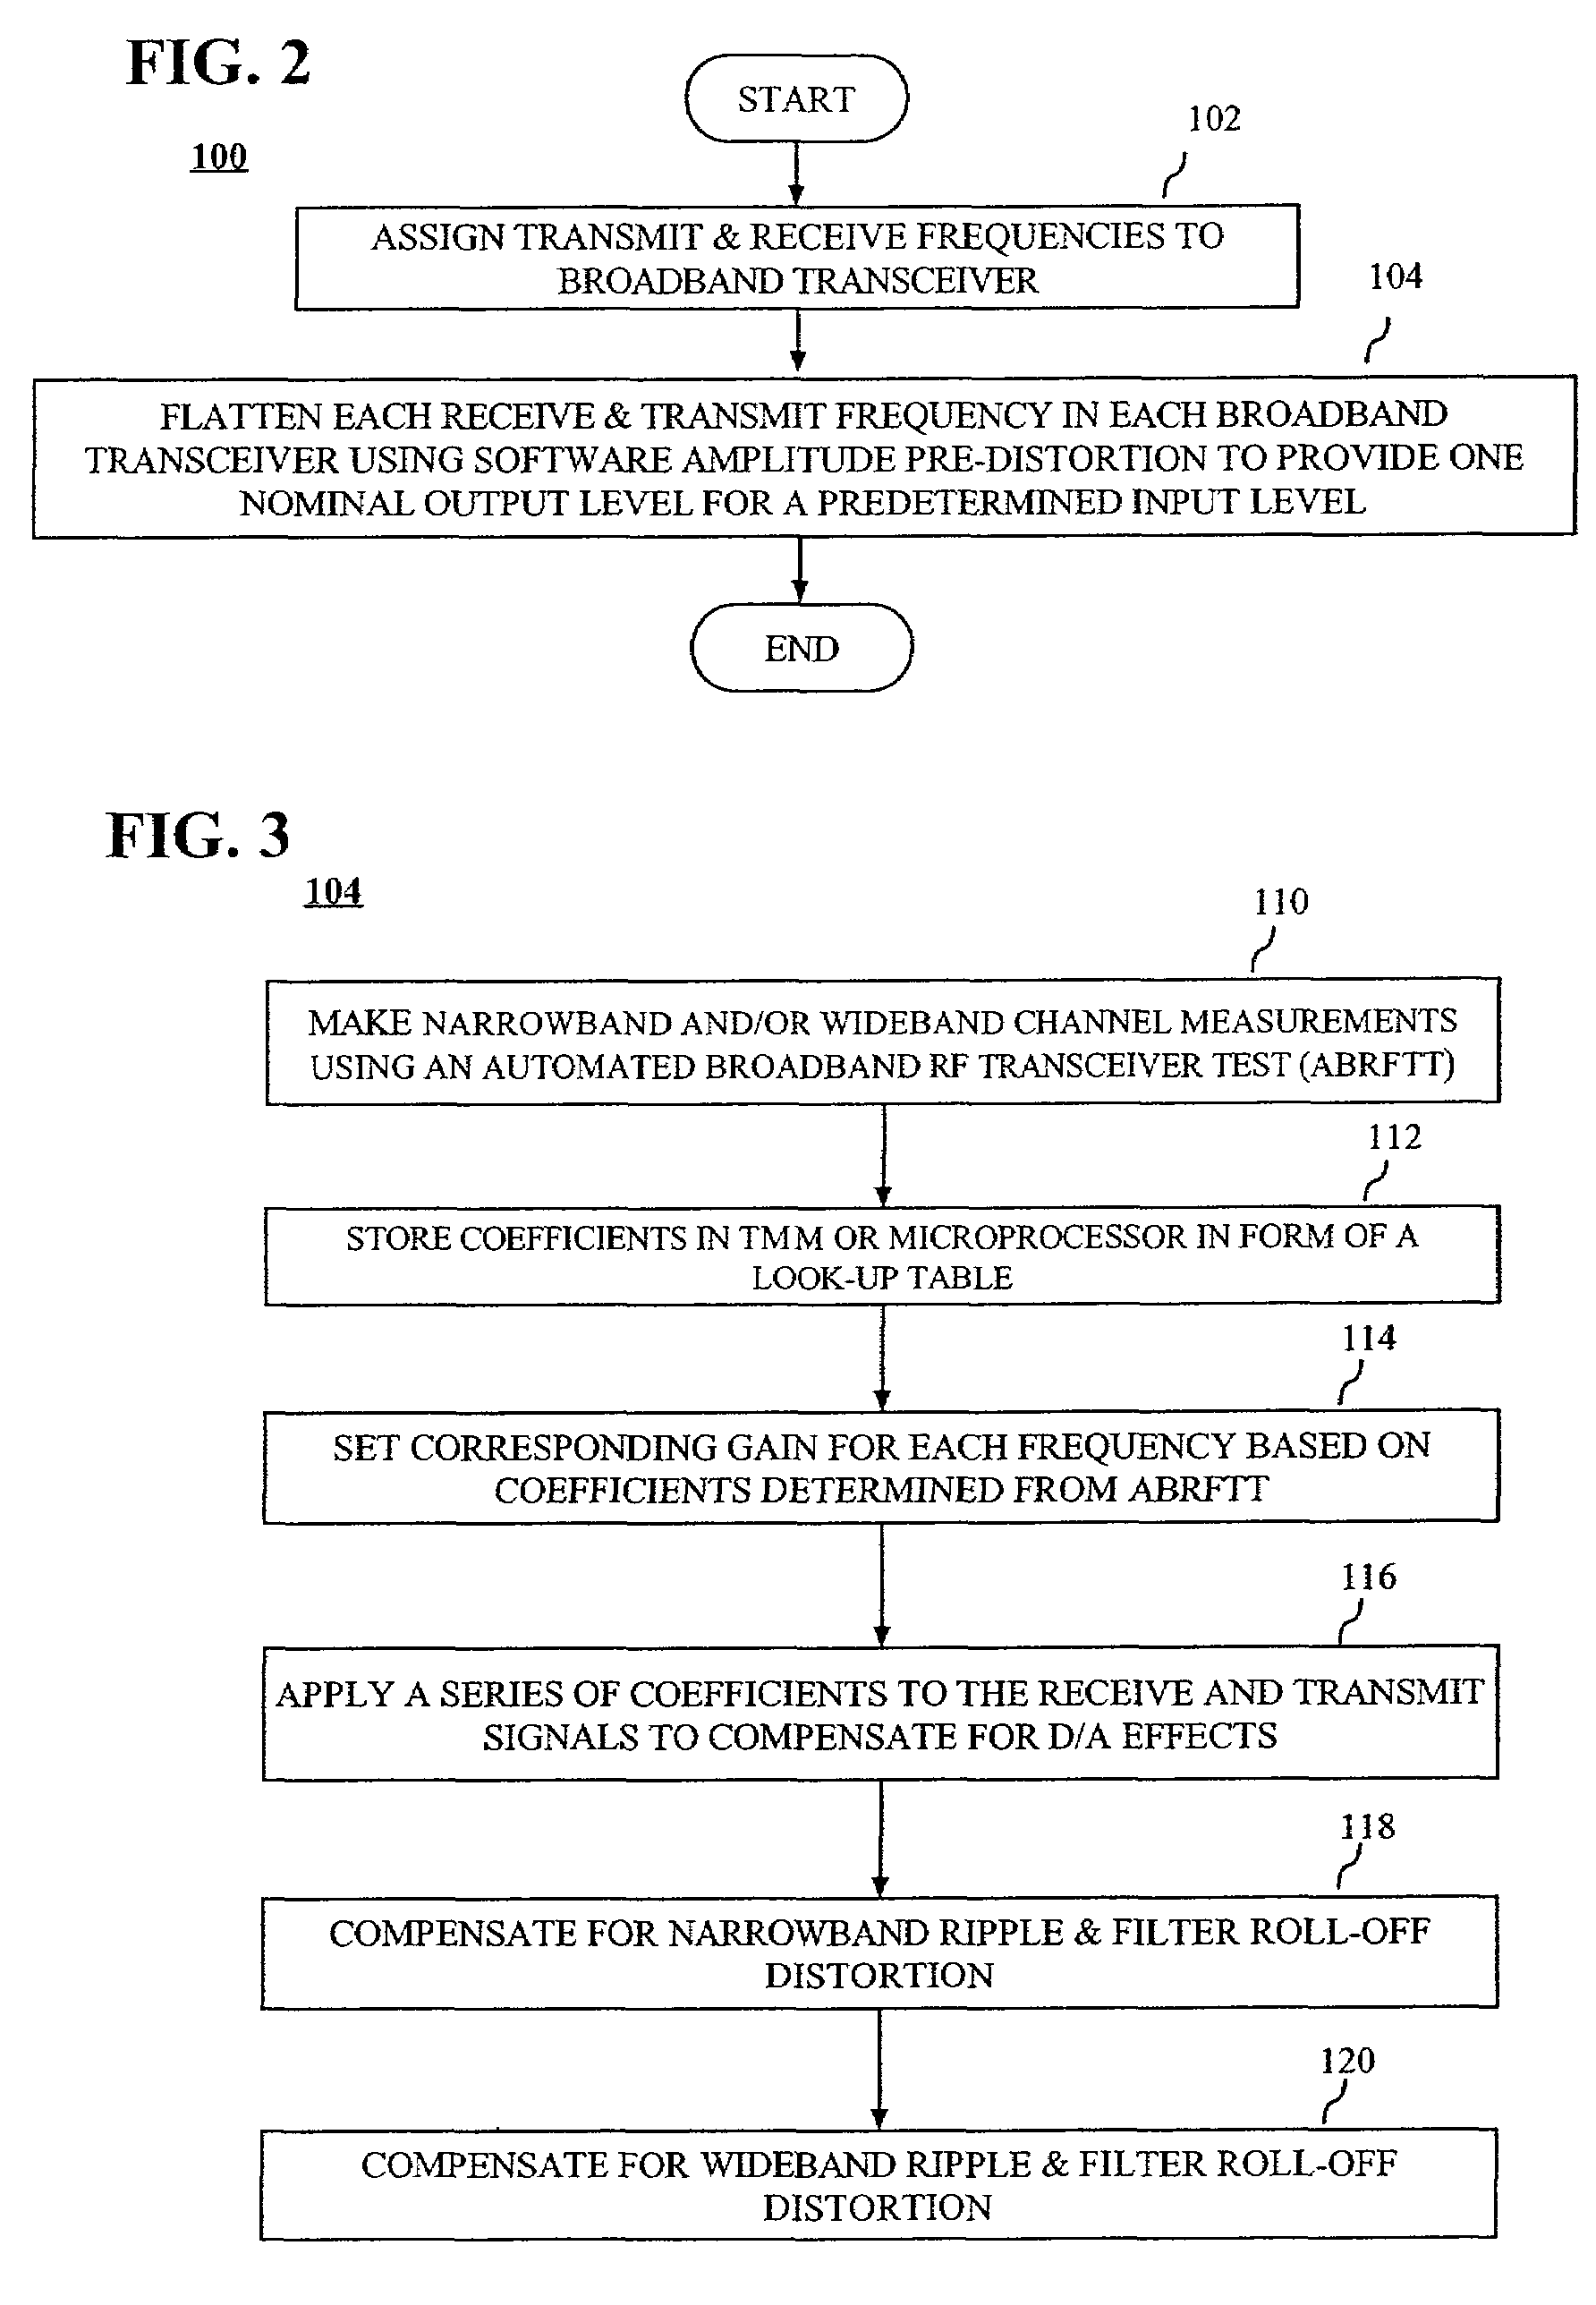 Method and apparatus for equalization in transmit and receive levels in a broadband transceiver system